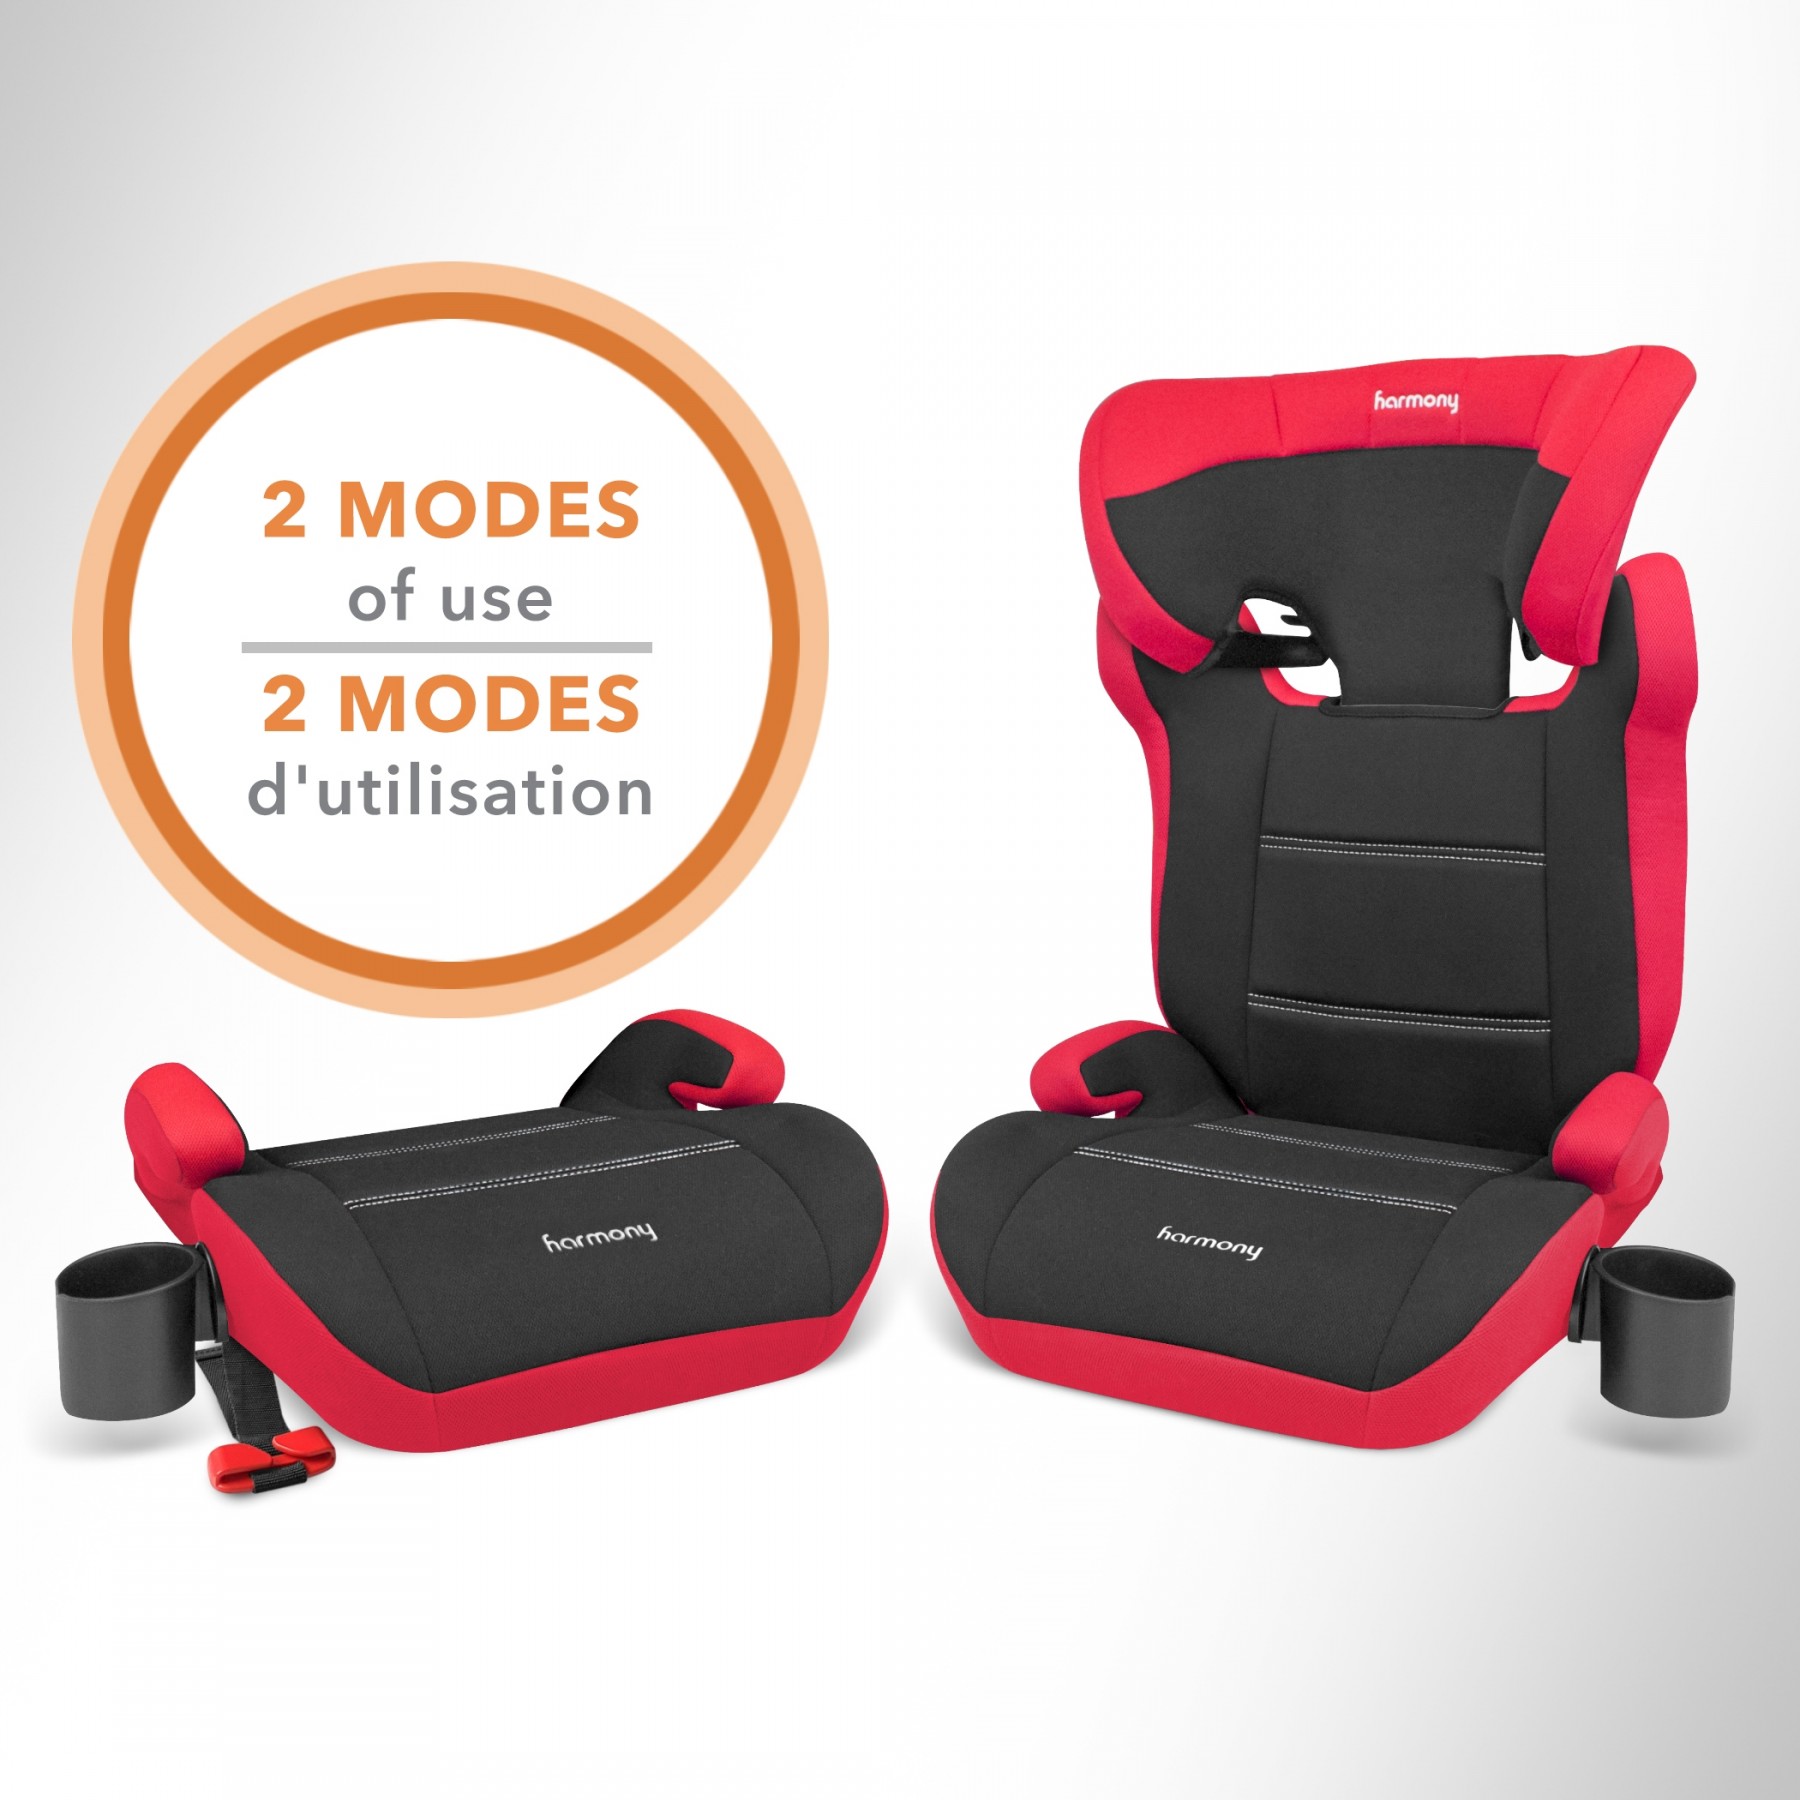 Dreamtime MAX Booster Car Seat - Red and Black